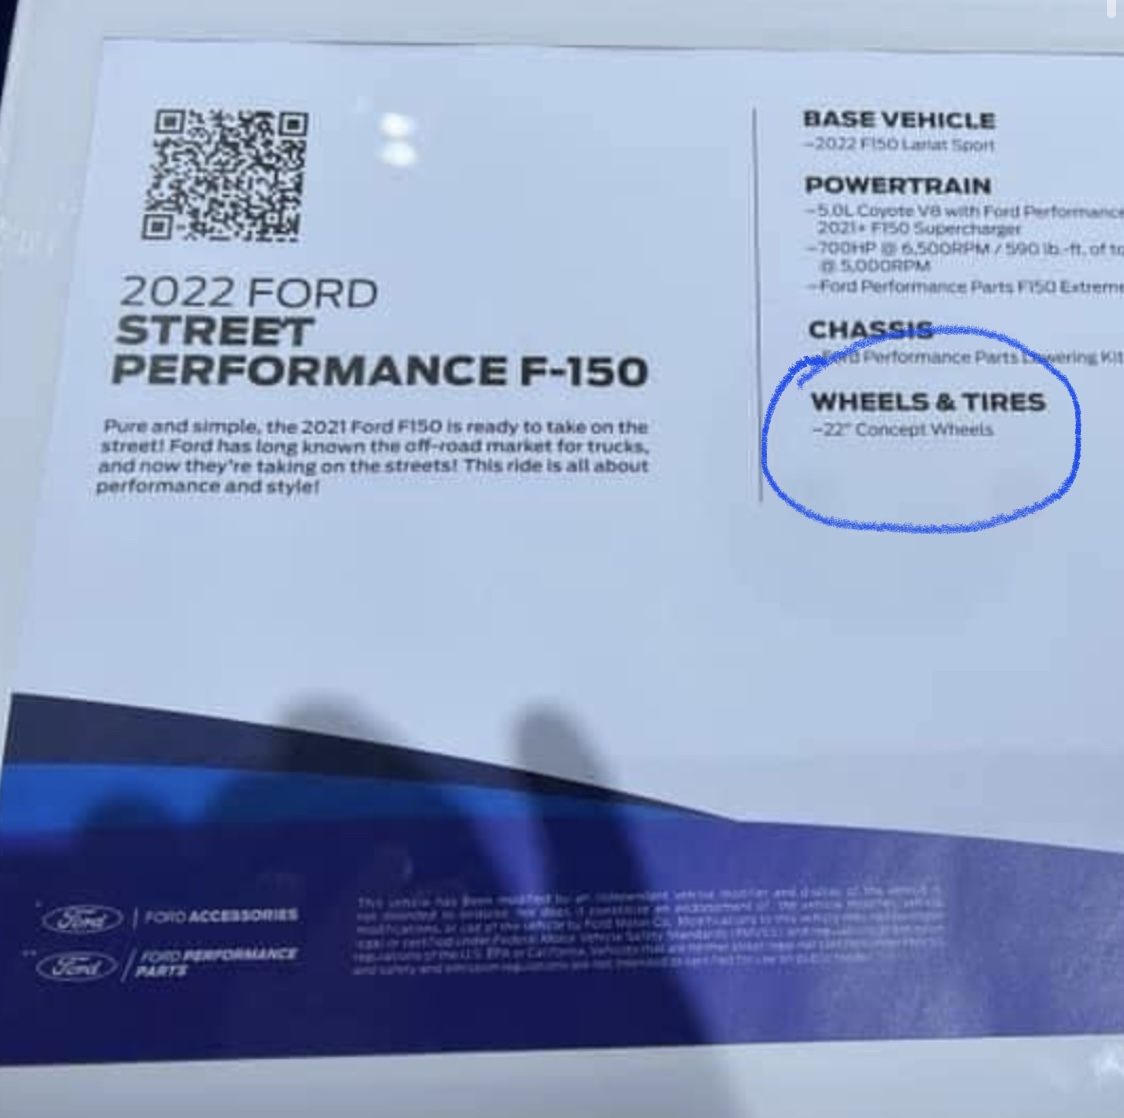 Ford F-150 2022 Ford Street Performance F-150 Supercharged V8 Debuts at SEMA 2021 FDD96AA6-2145-422A-97D6-EA84A8831C7C